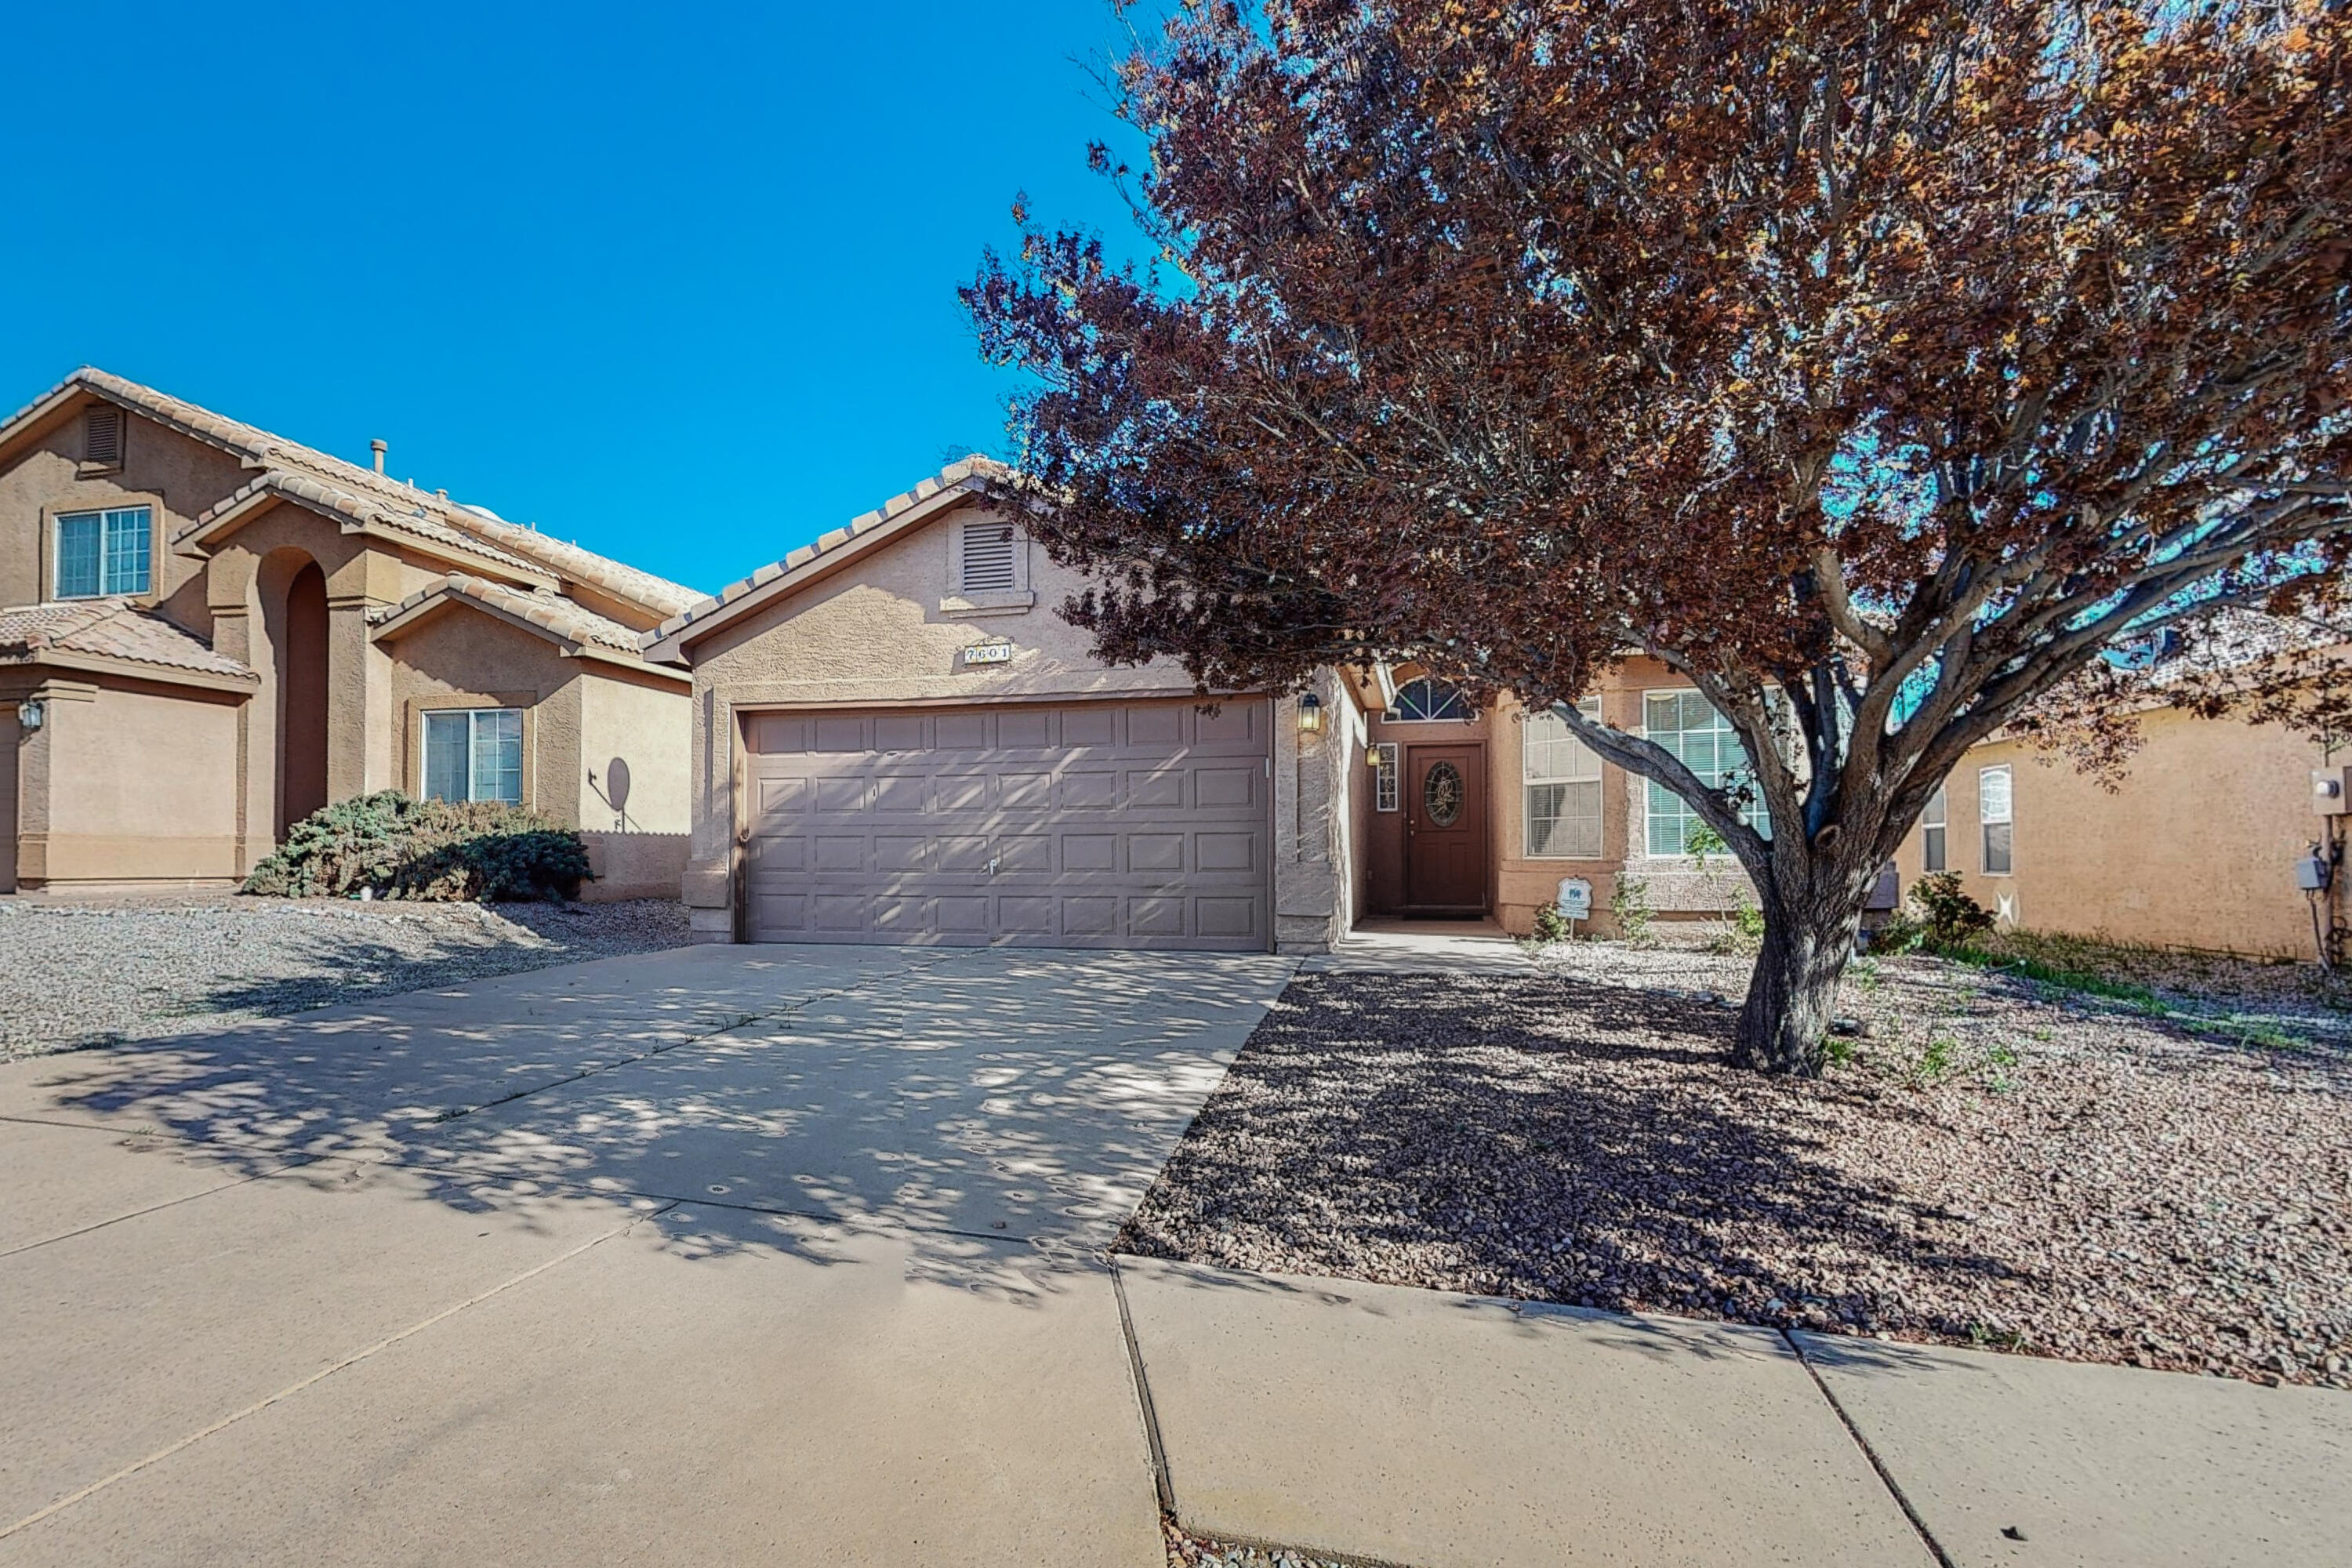 Come take a look at the newly painted interior and great open floor plan.Seize this amazing opportunity to own in a beautifully maintained gated community.Schedule your viewing today.Seller to provide up to $5000.00 Buyer Credit with an acceptable offer.